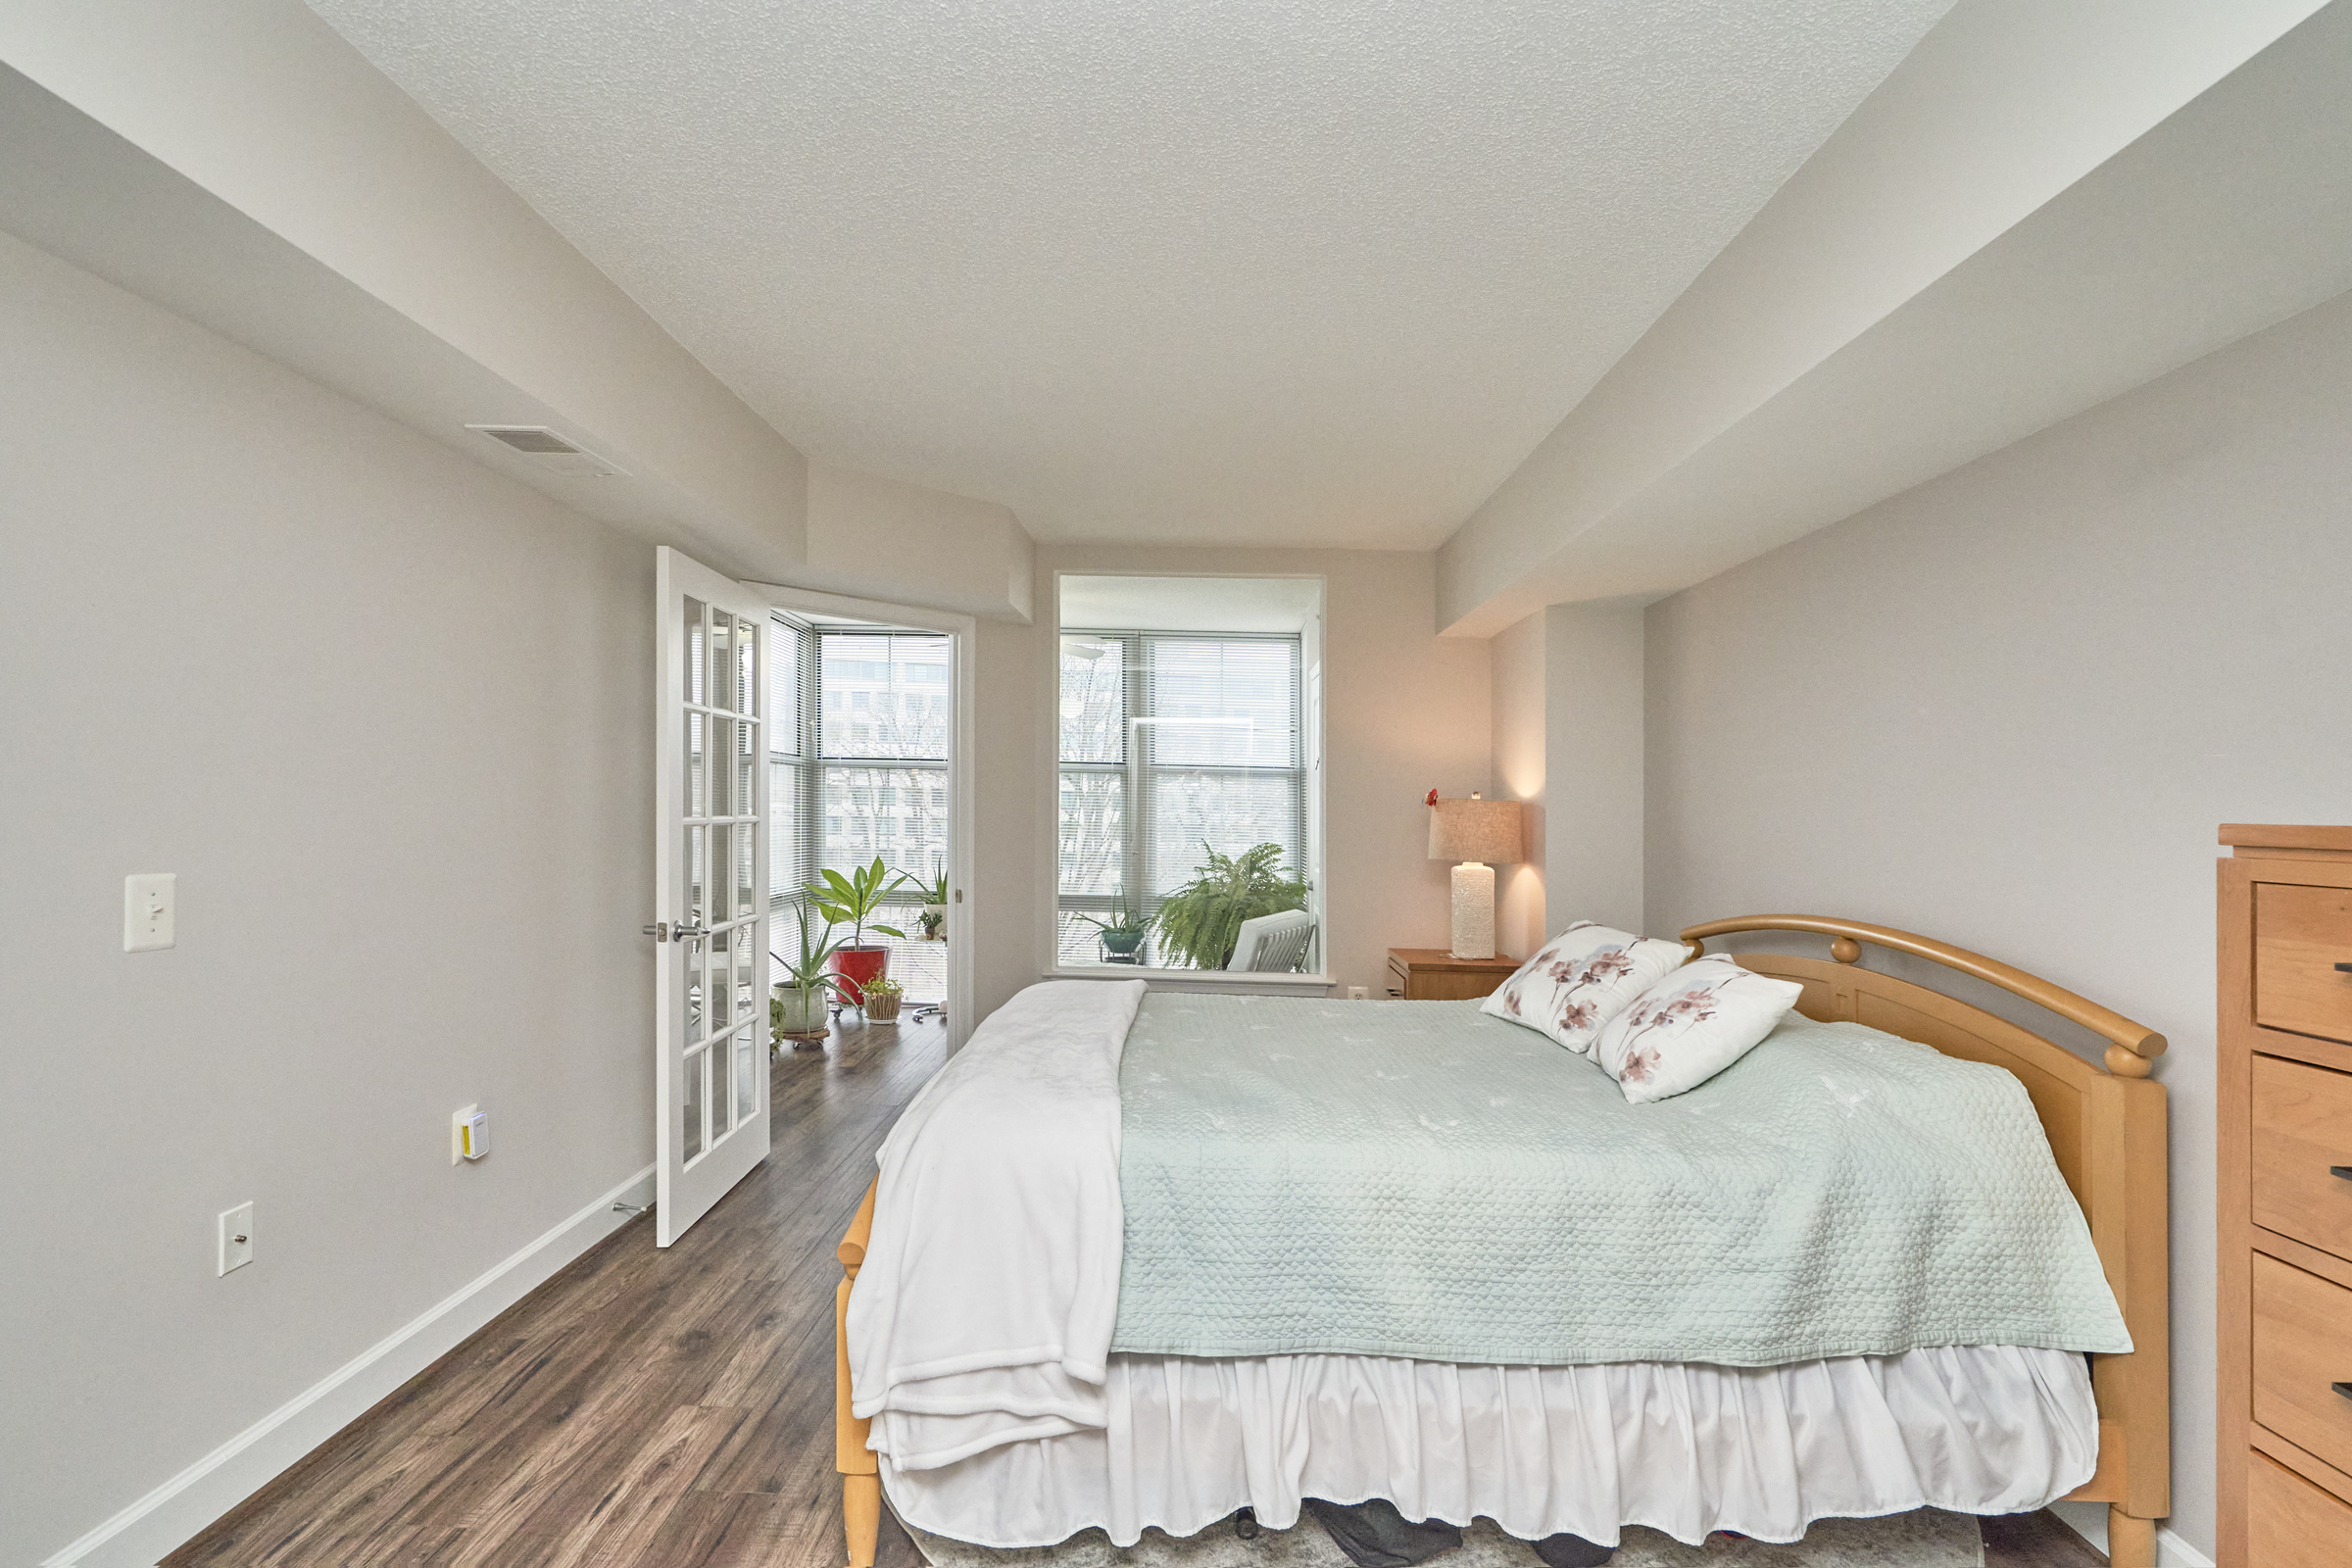 Interior professional photo of 11800 Sunset Hills Road Unit #811, showing one of the bedrooms with recessed ceiling, bed in the foreground, and view of the connected sunroom in the background